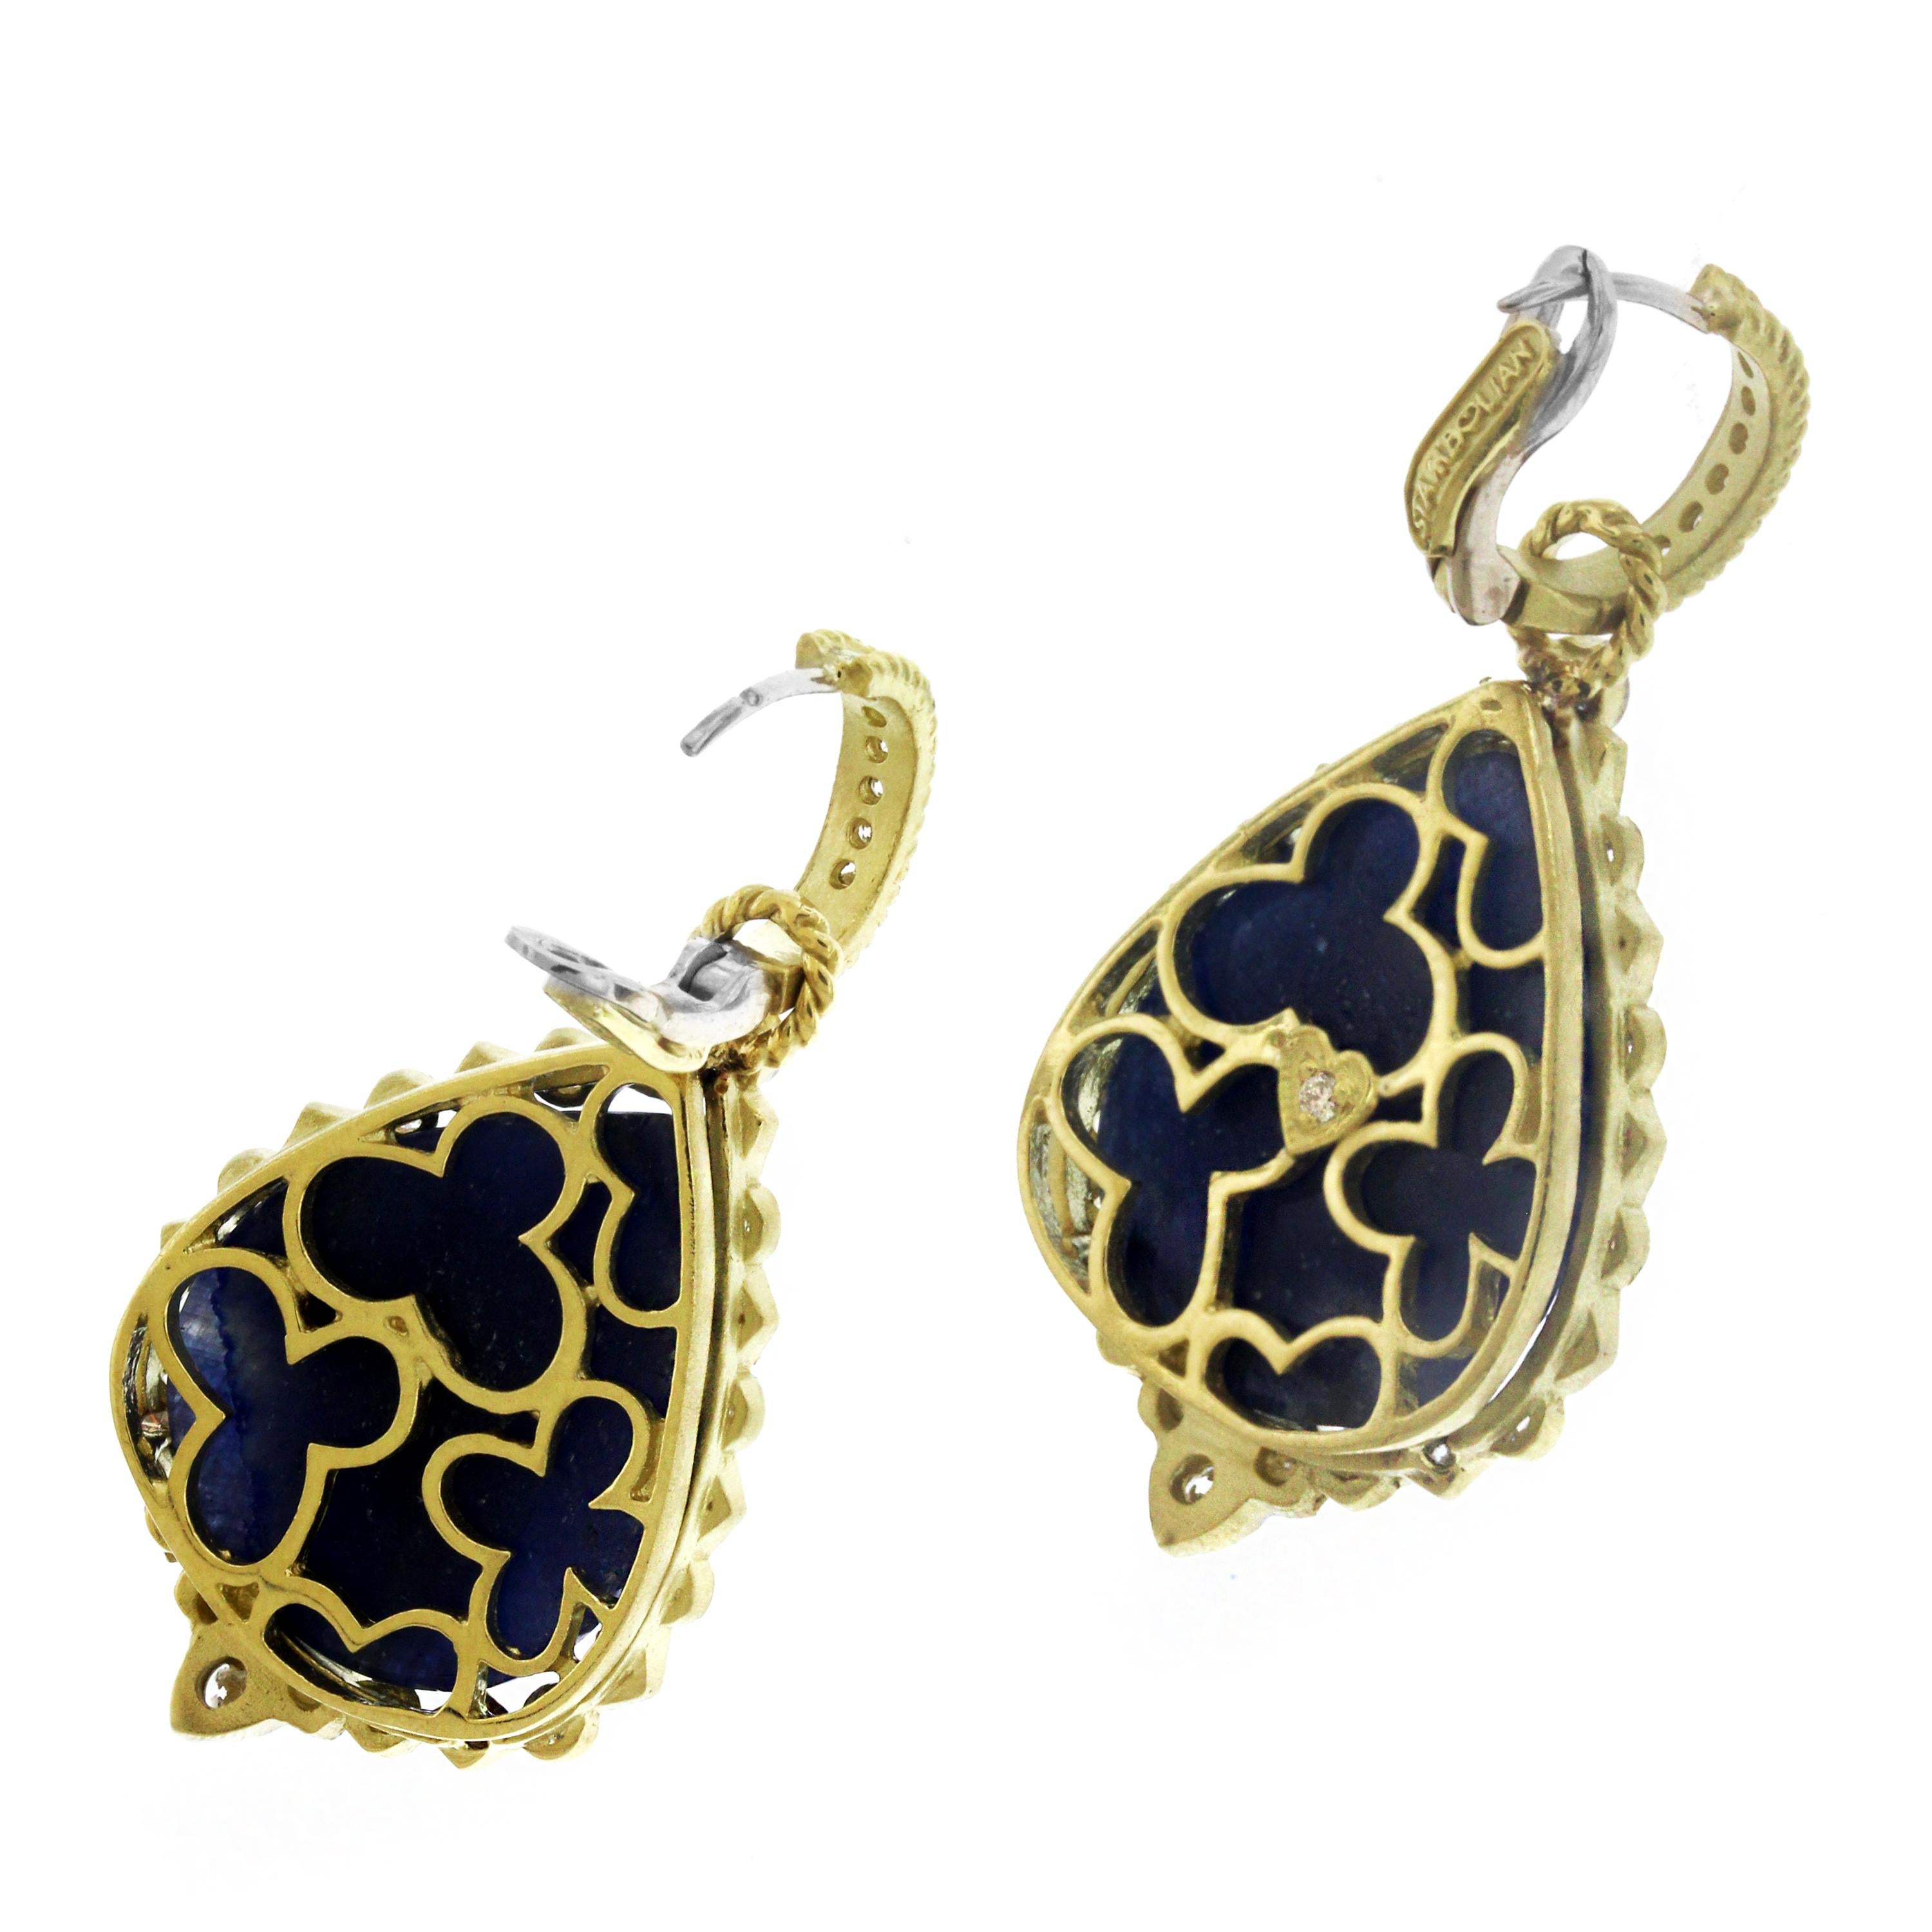 IF YOU ARE REALLY INTERESTED, CONTACT US WITH ANY REASONABLE OFFER. WE WILL TRY OUR BEST TO MAKE YOU HAPPY!

18K Gold and Diamond Drop Earrings with Rose Cut Blue Sapphires

Sliced Blue Sapphires are stunning in color. Pear Shape, Rose-cuts.

36.12